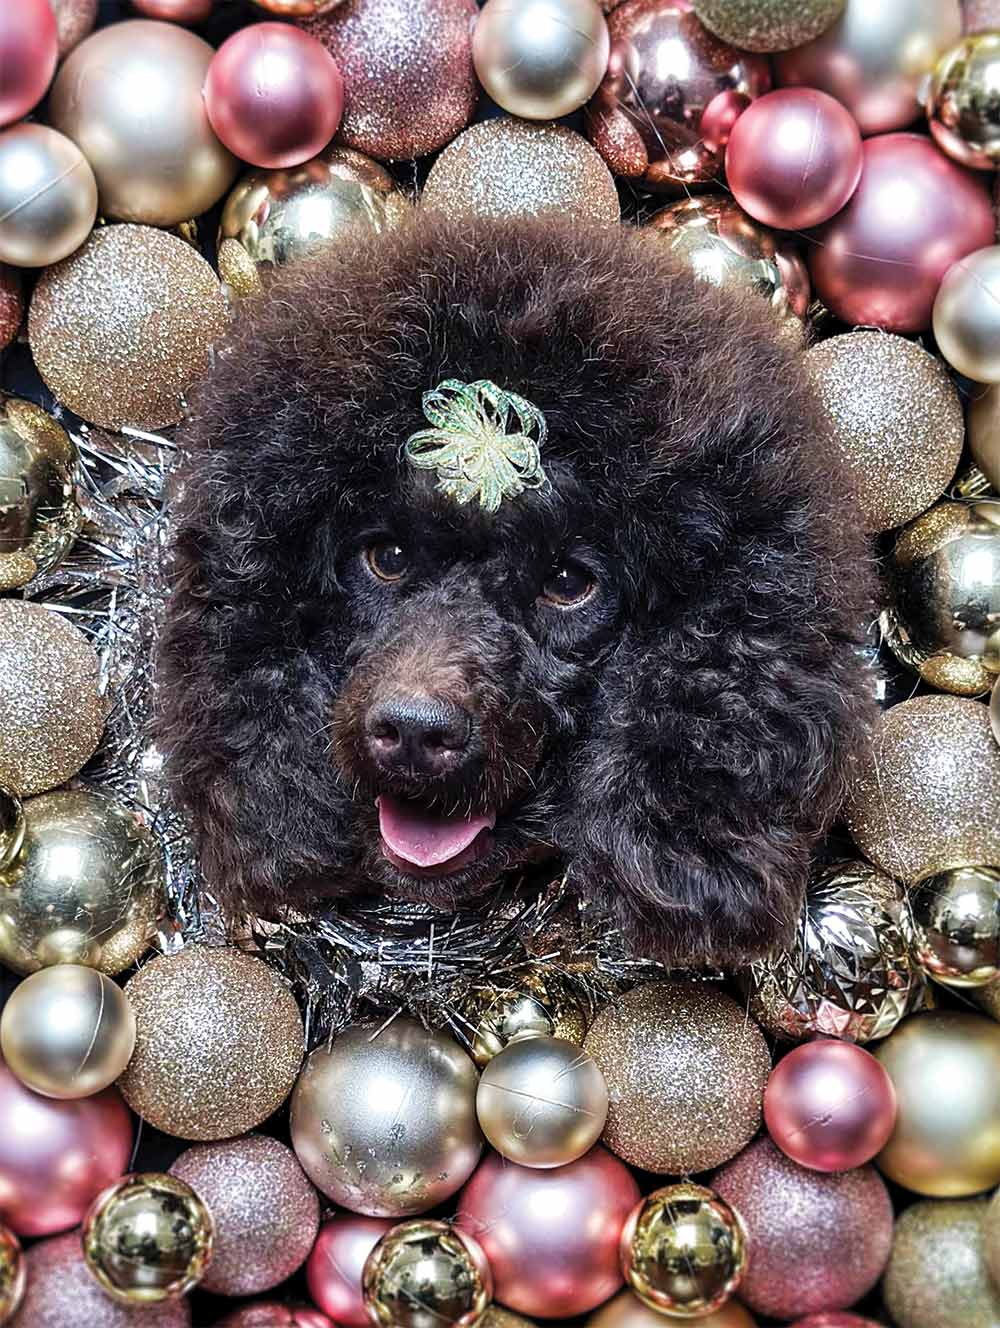 Close-up portrait photograph perspective of a black fluffy Poodle dog's face sticking its tongue out through the circular cut-out hole amongst the dark/light bronze Garland/Tinsel with many glued Ornaments surrounded with shiny lighted reflections off the Ornaments